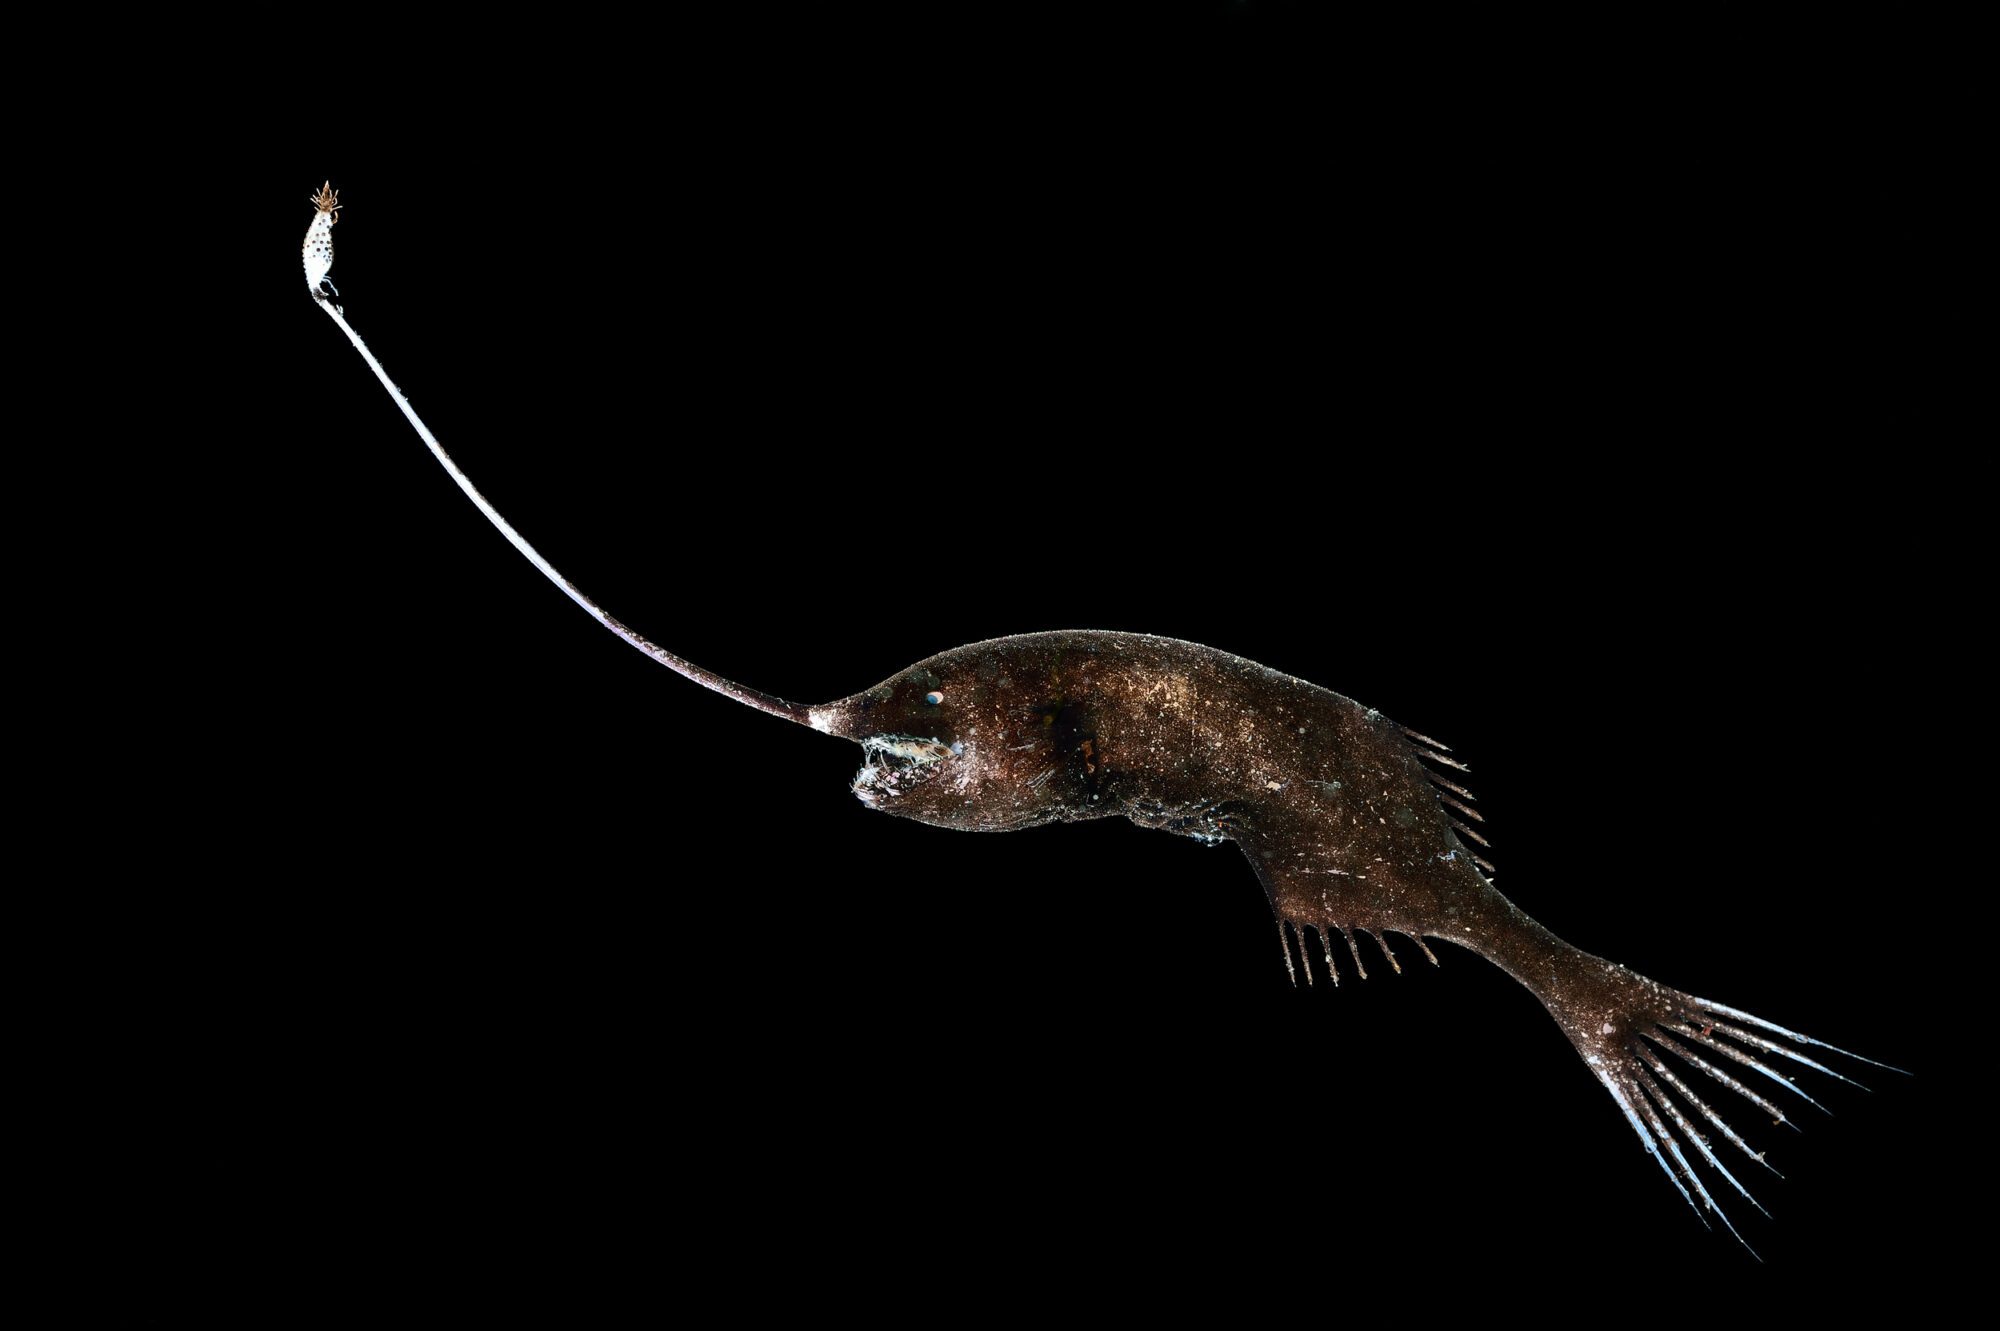 A fish with a long spike coming out of its nose on a pitch-black background